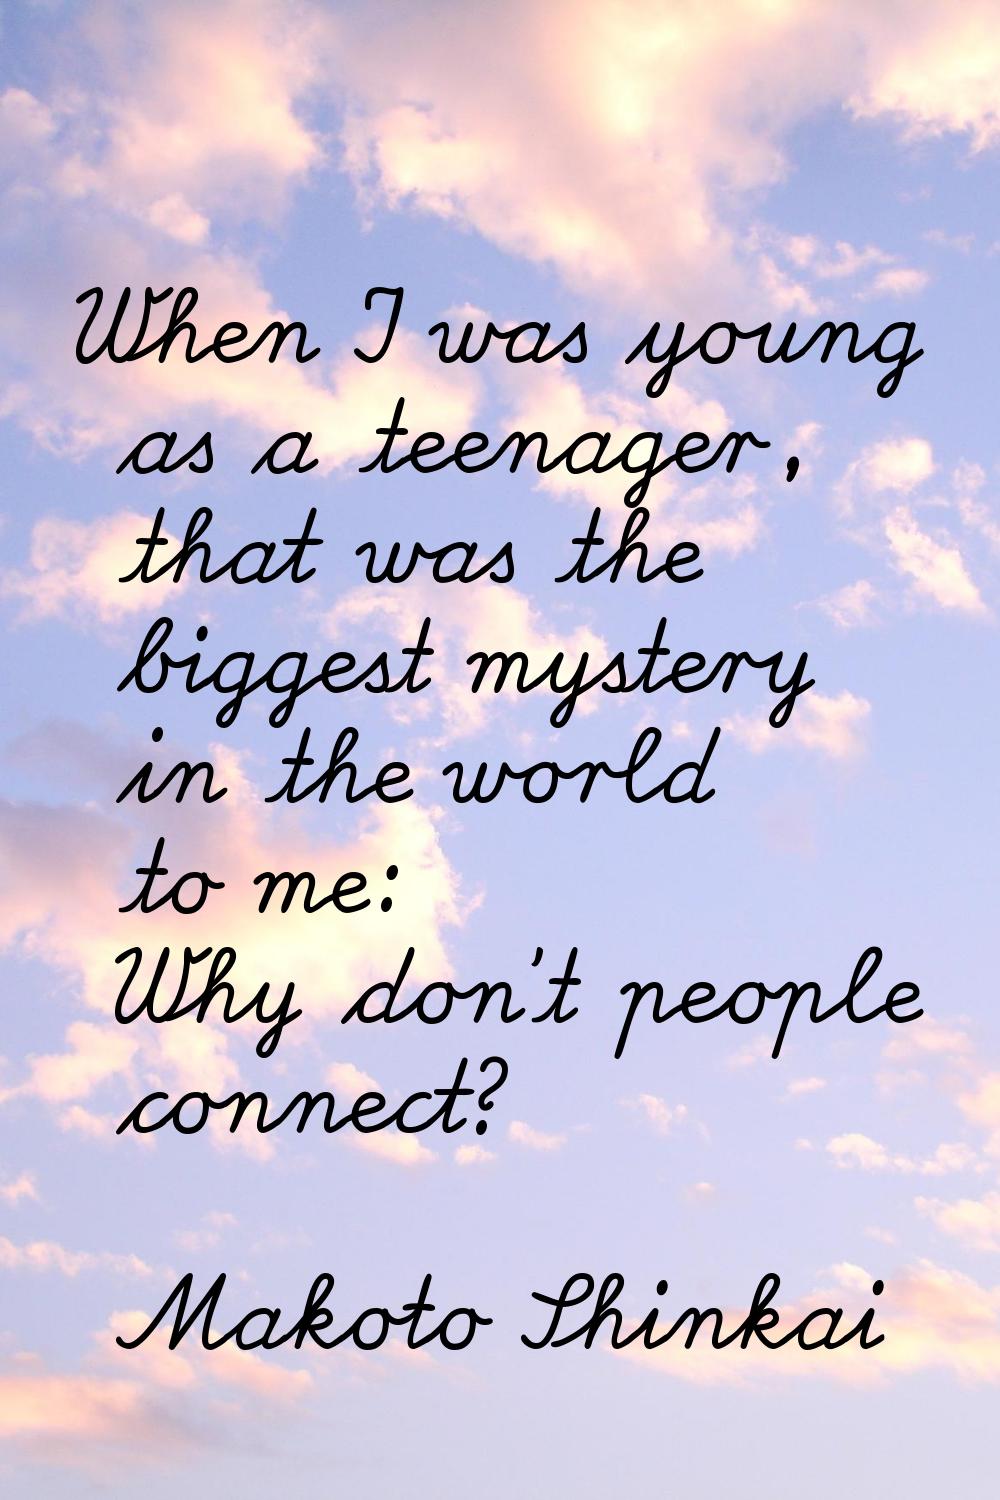 When I was young as a teenager, that was the biggest mystery in the world to me: Why don't people c